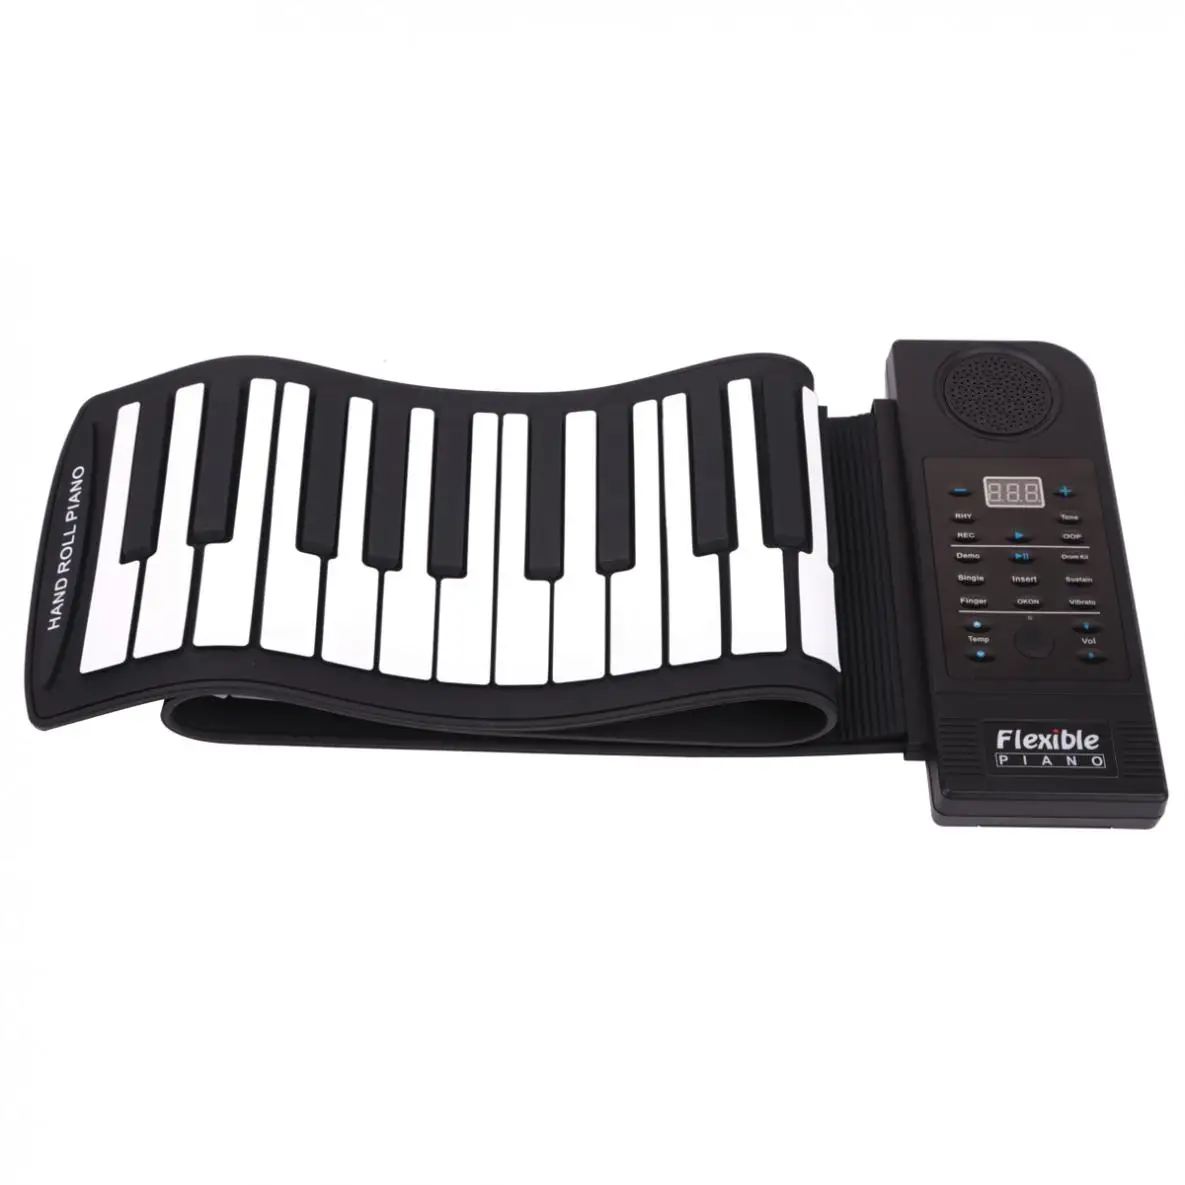 Portable 61 Keys Roll Up Flexible Silicone Piano Electronic MIDI Keyboard Organ for Beginners / Professional Performance enlarge